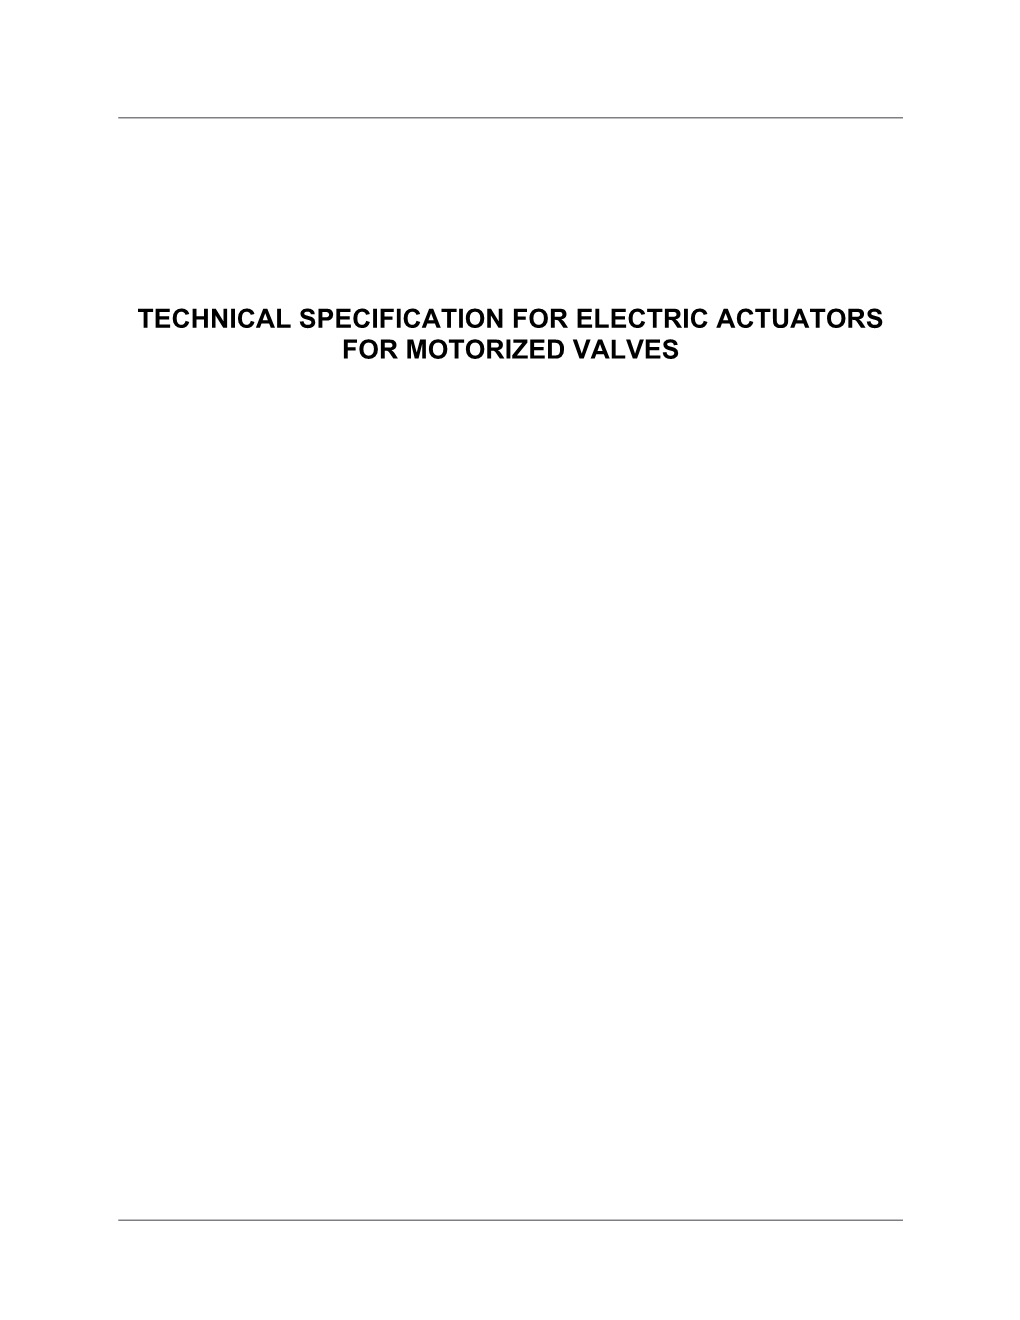 Technical Specification for Electric Actuators for Motorized Valves